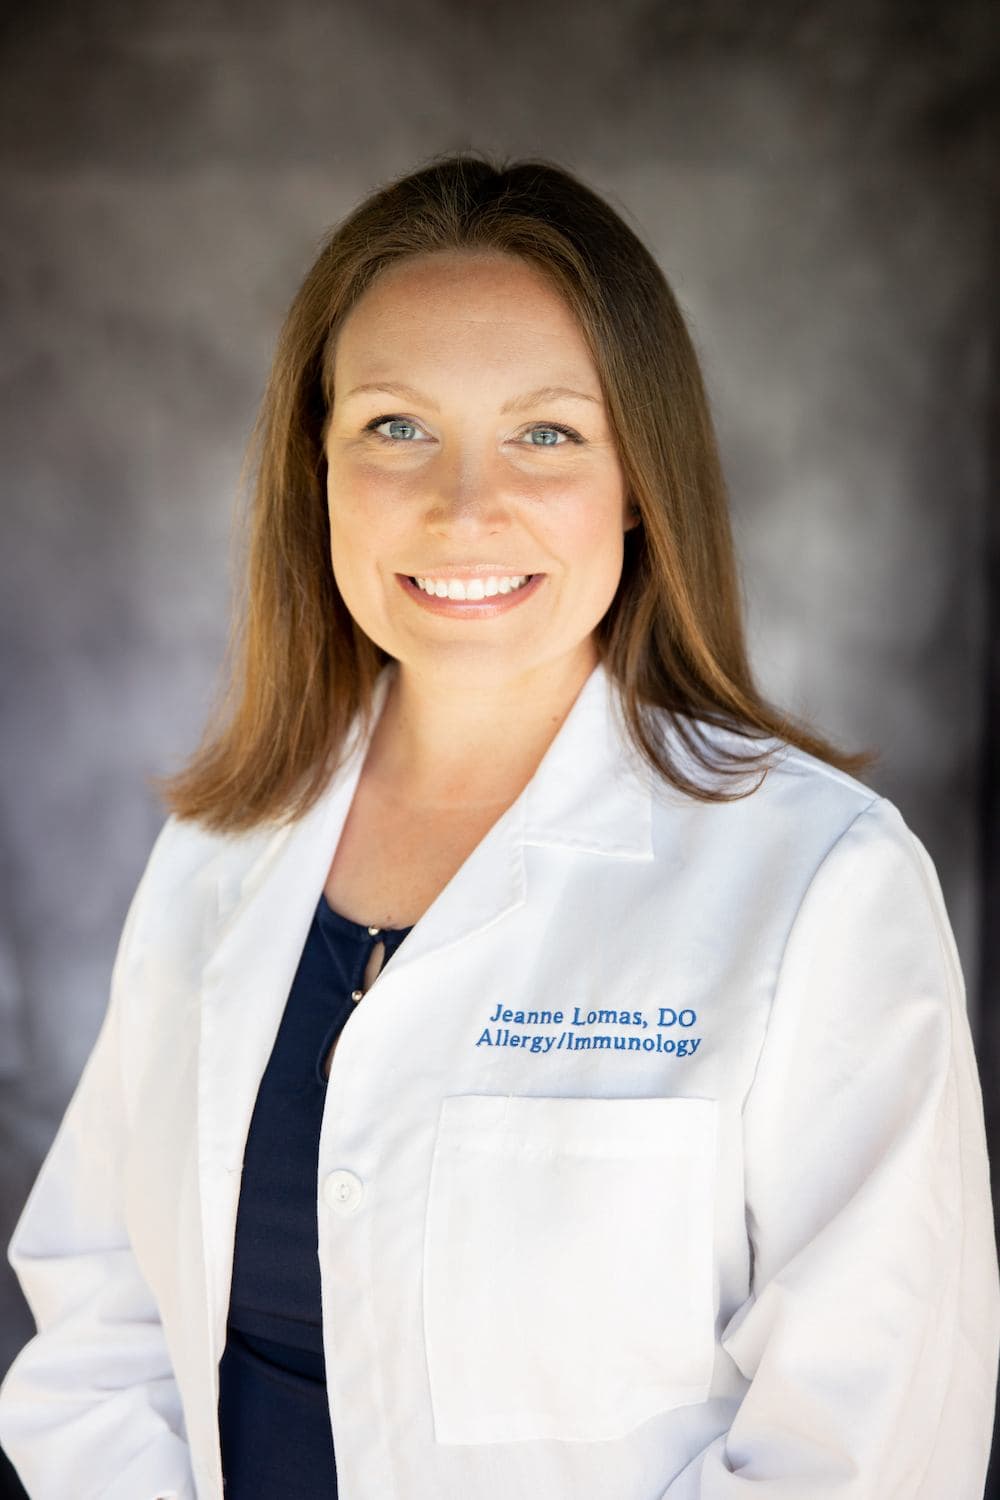 Dr. Jeanne Lomas - Director of Allergy & Immunology